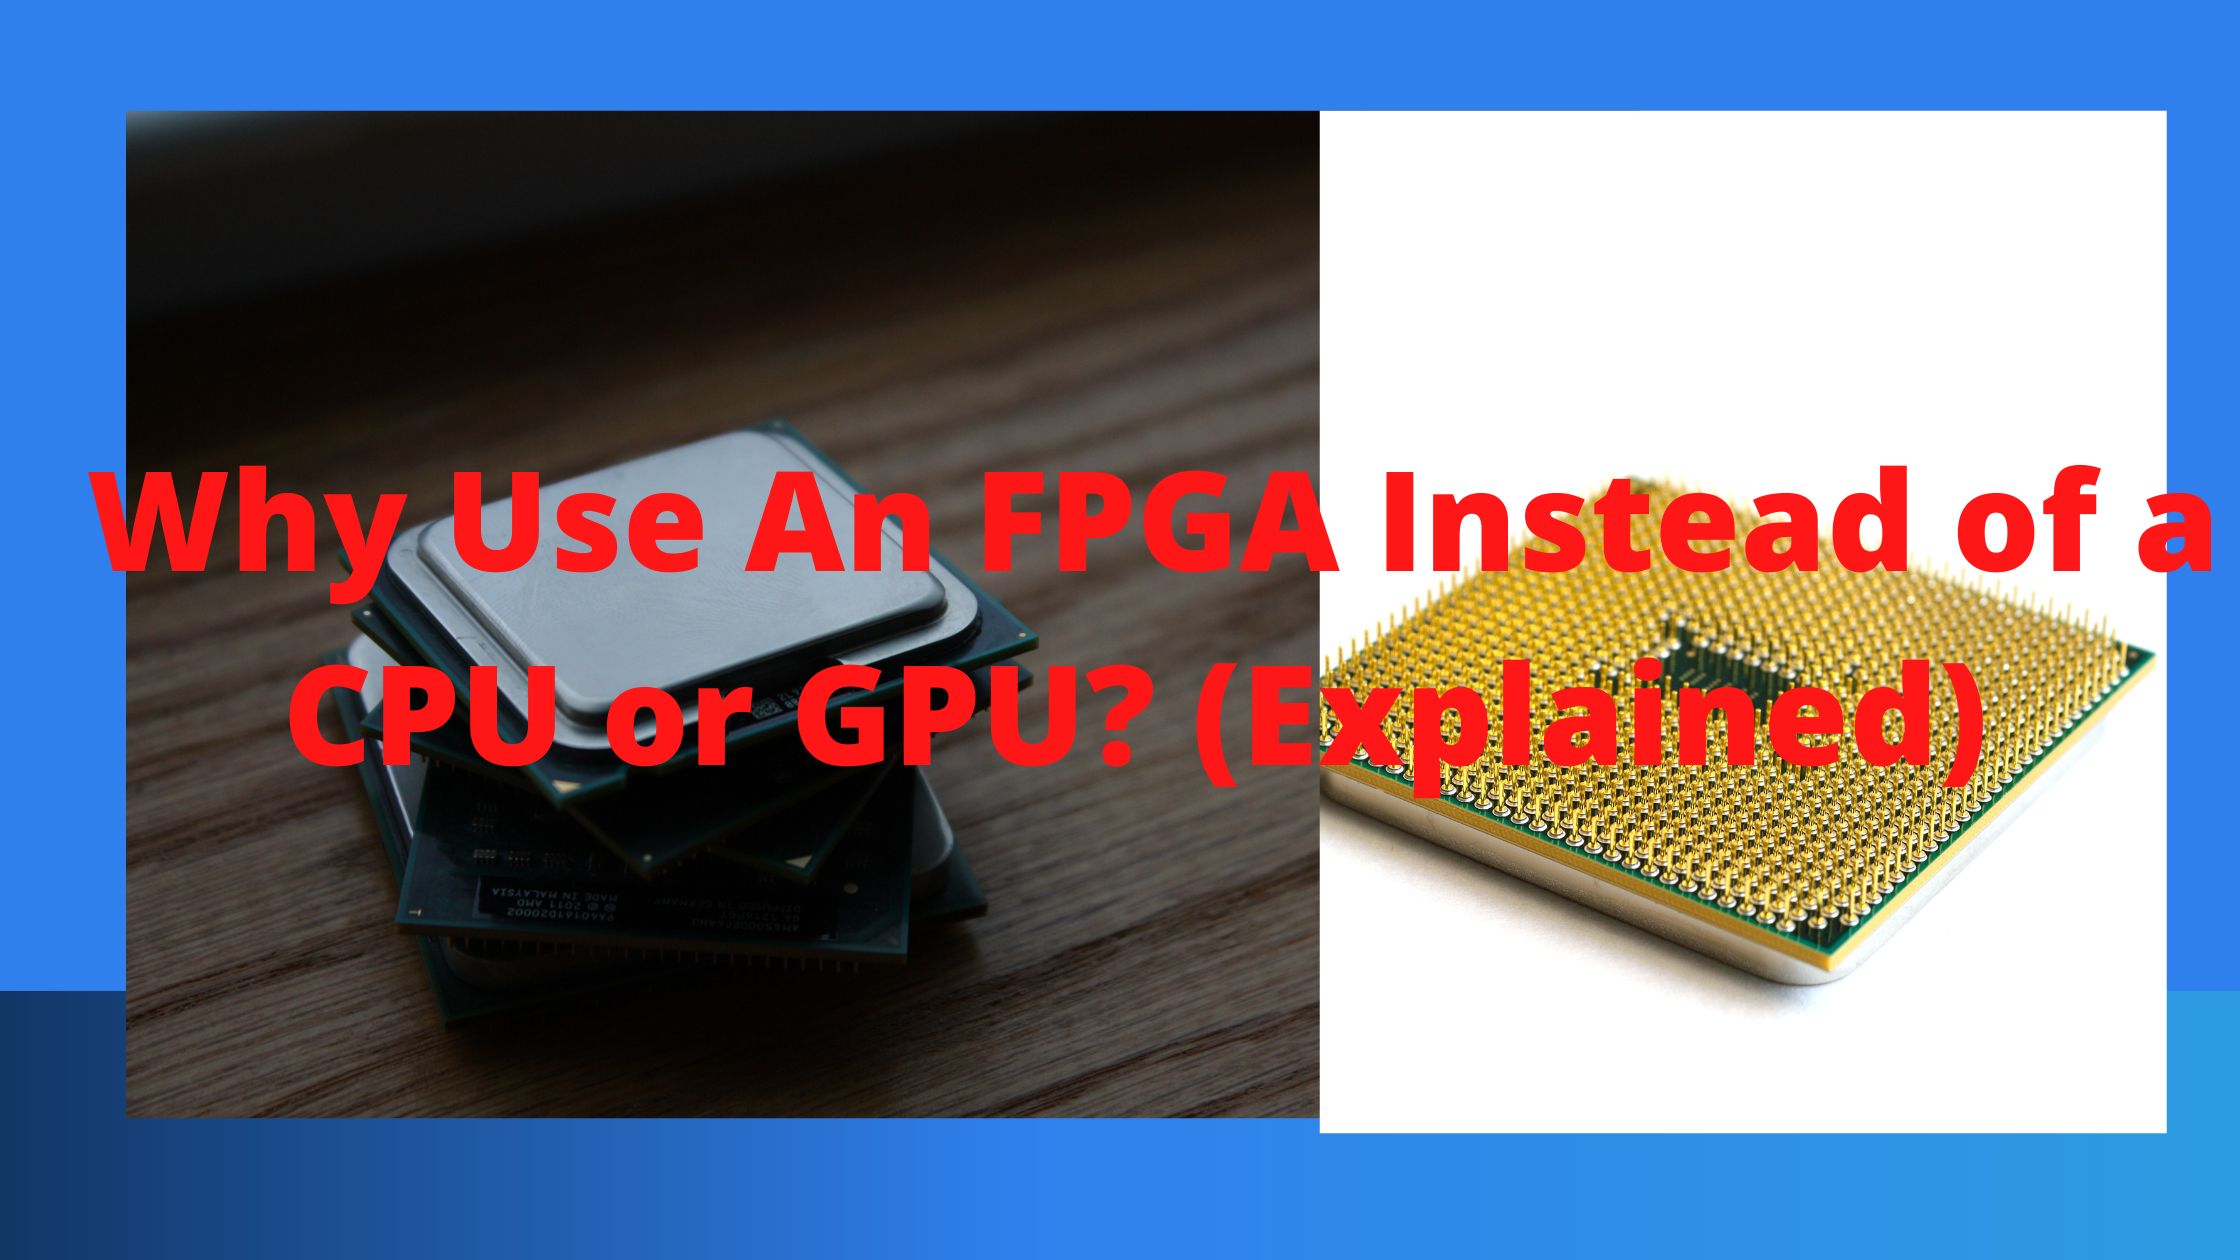 Why Use An FPGA Instead of a CPU or GPU? (Explained)